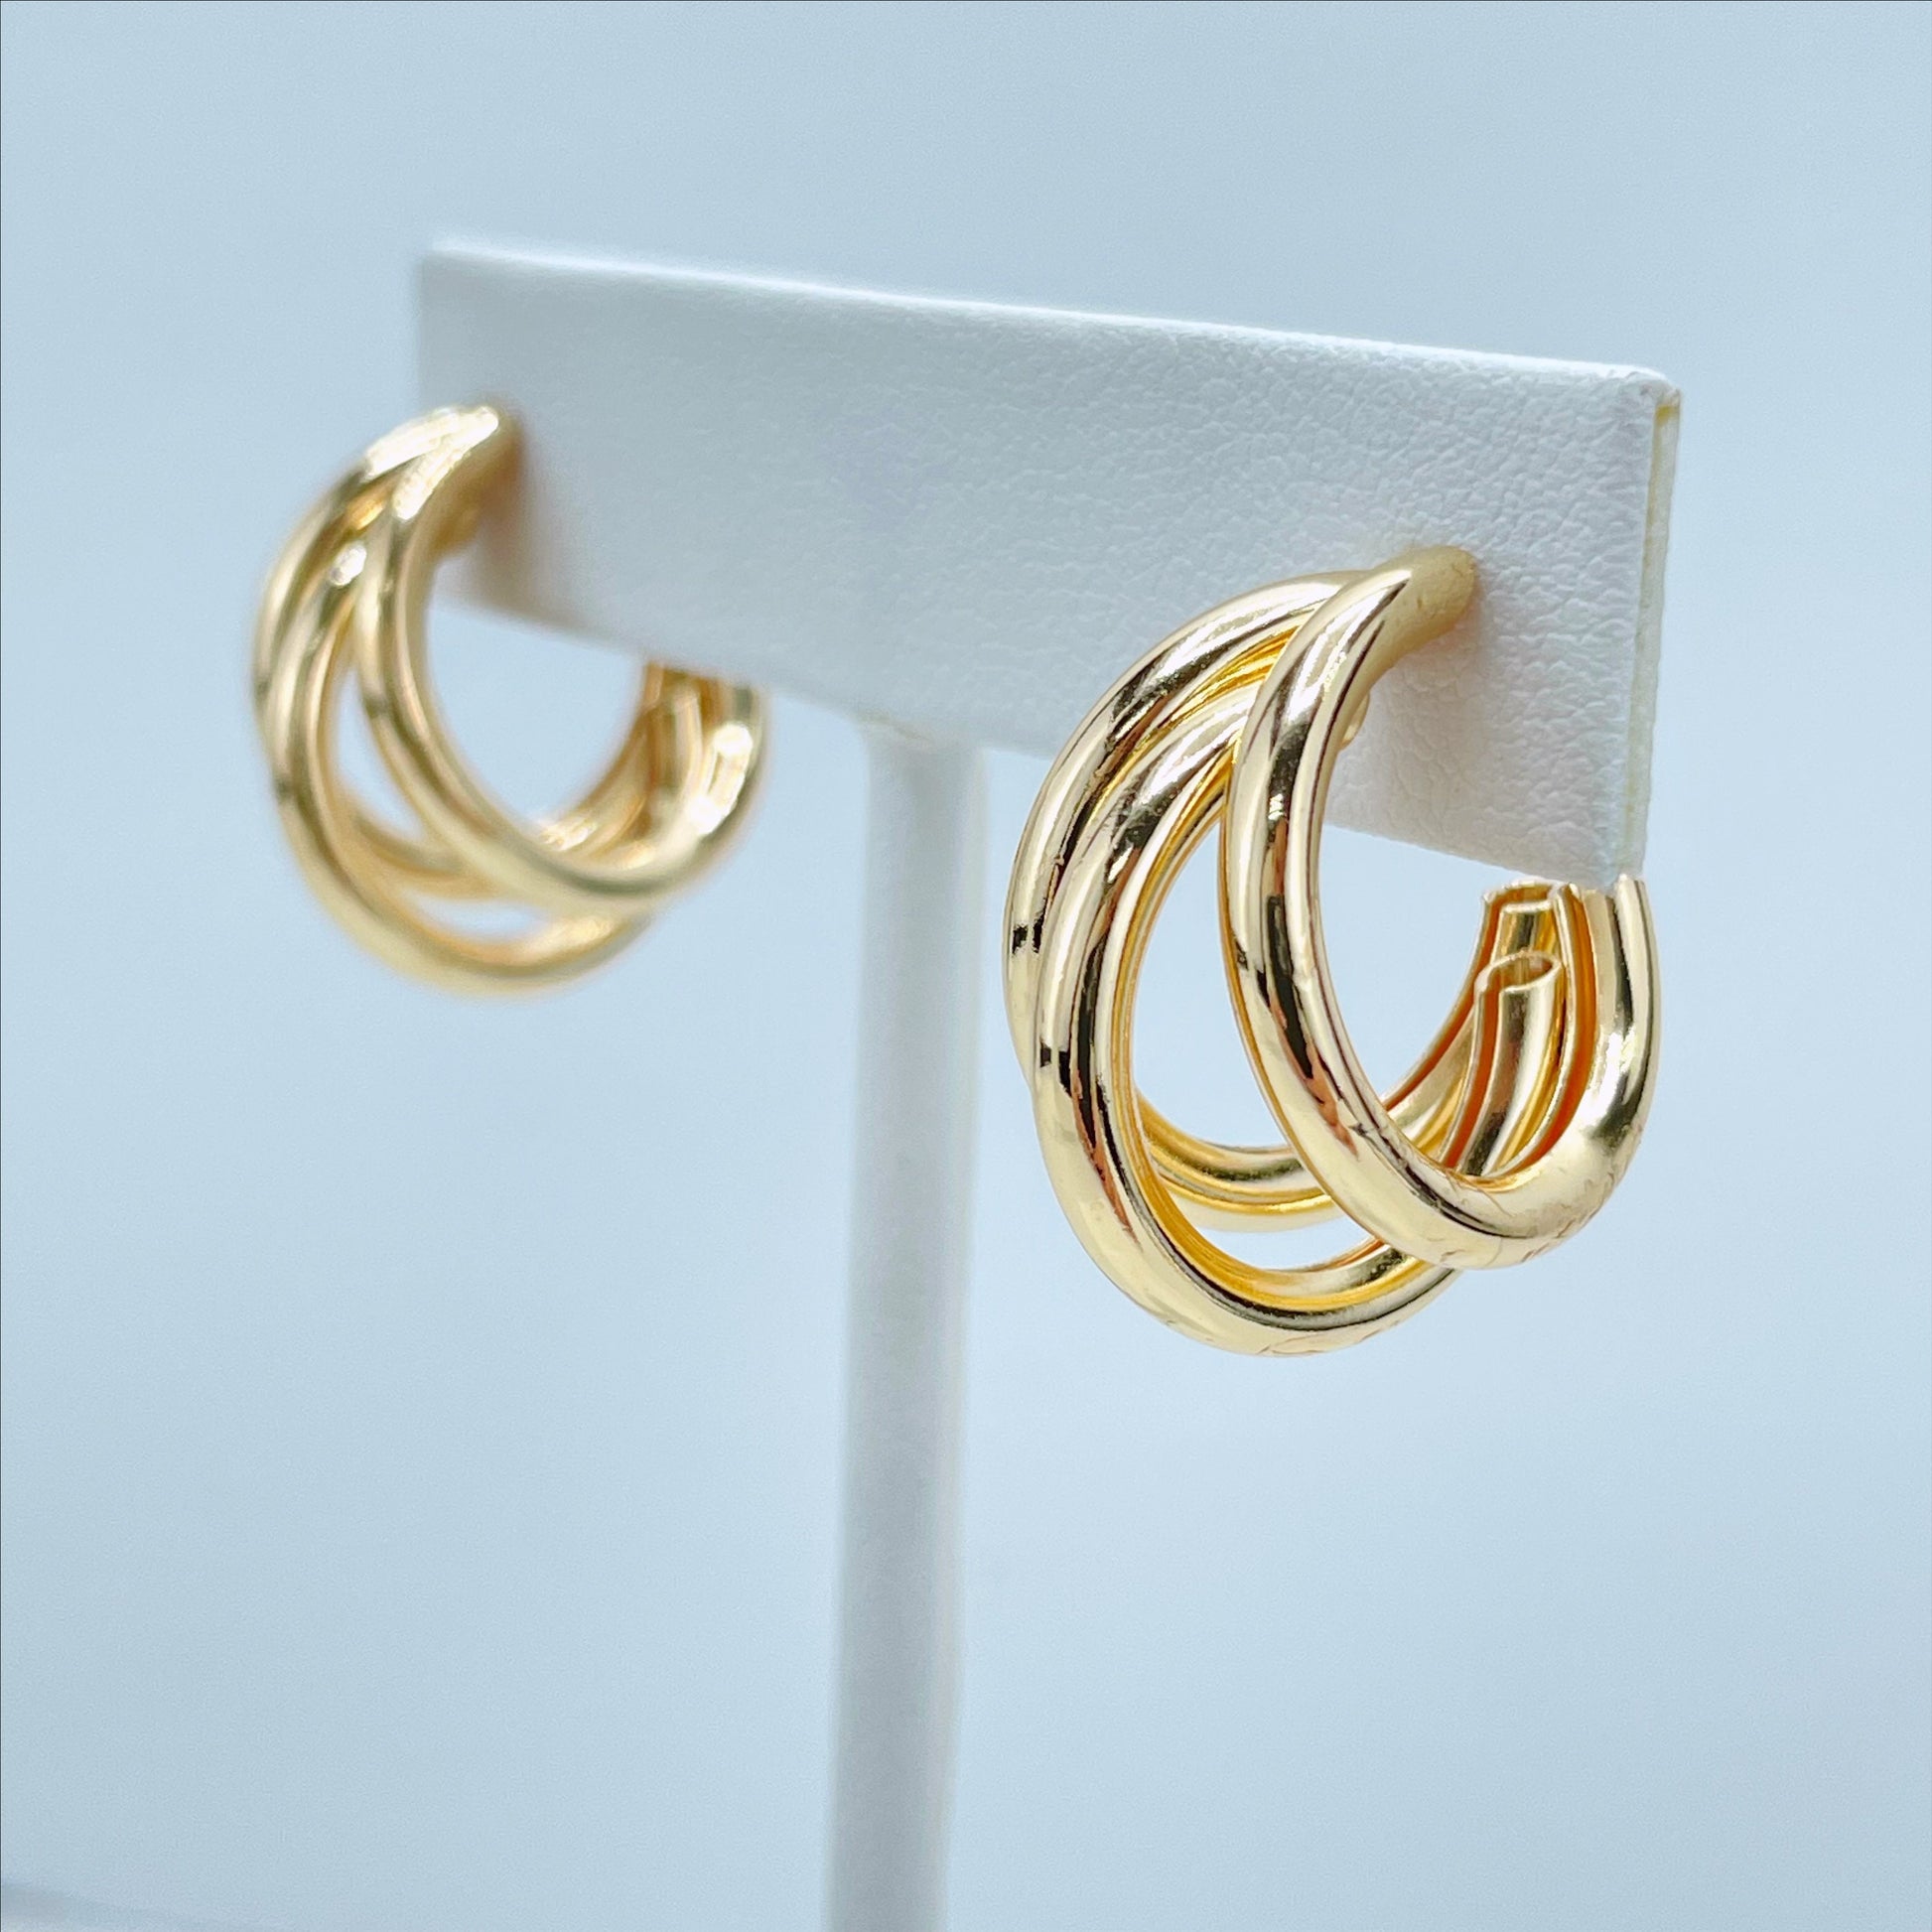 18k Gold Filled 20mm or 25mm Tubular Braided C-Hoop Earrings, Wholesale Jewelry Making Supplies